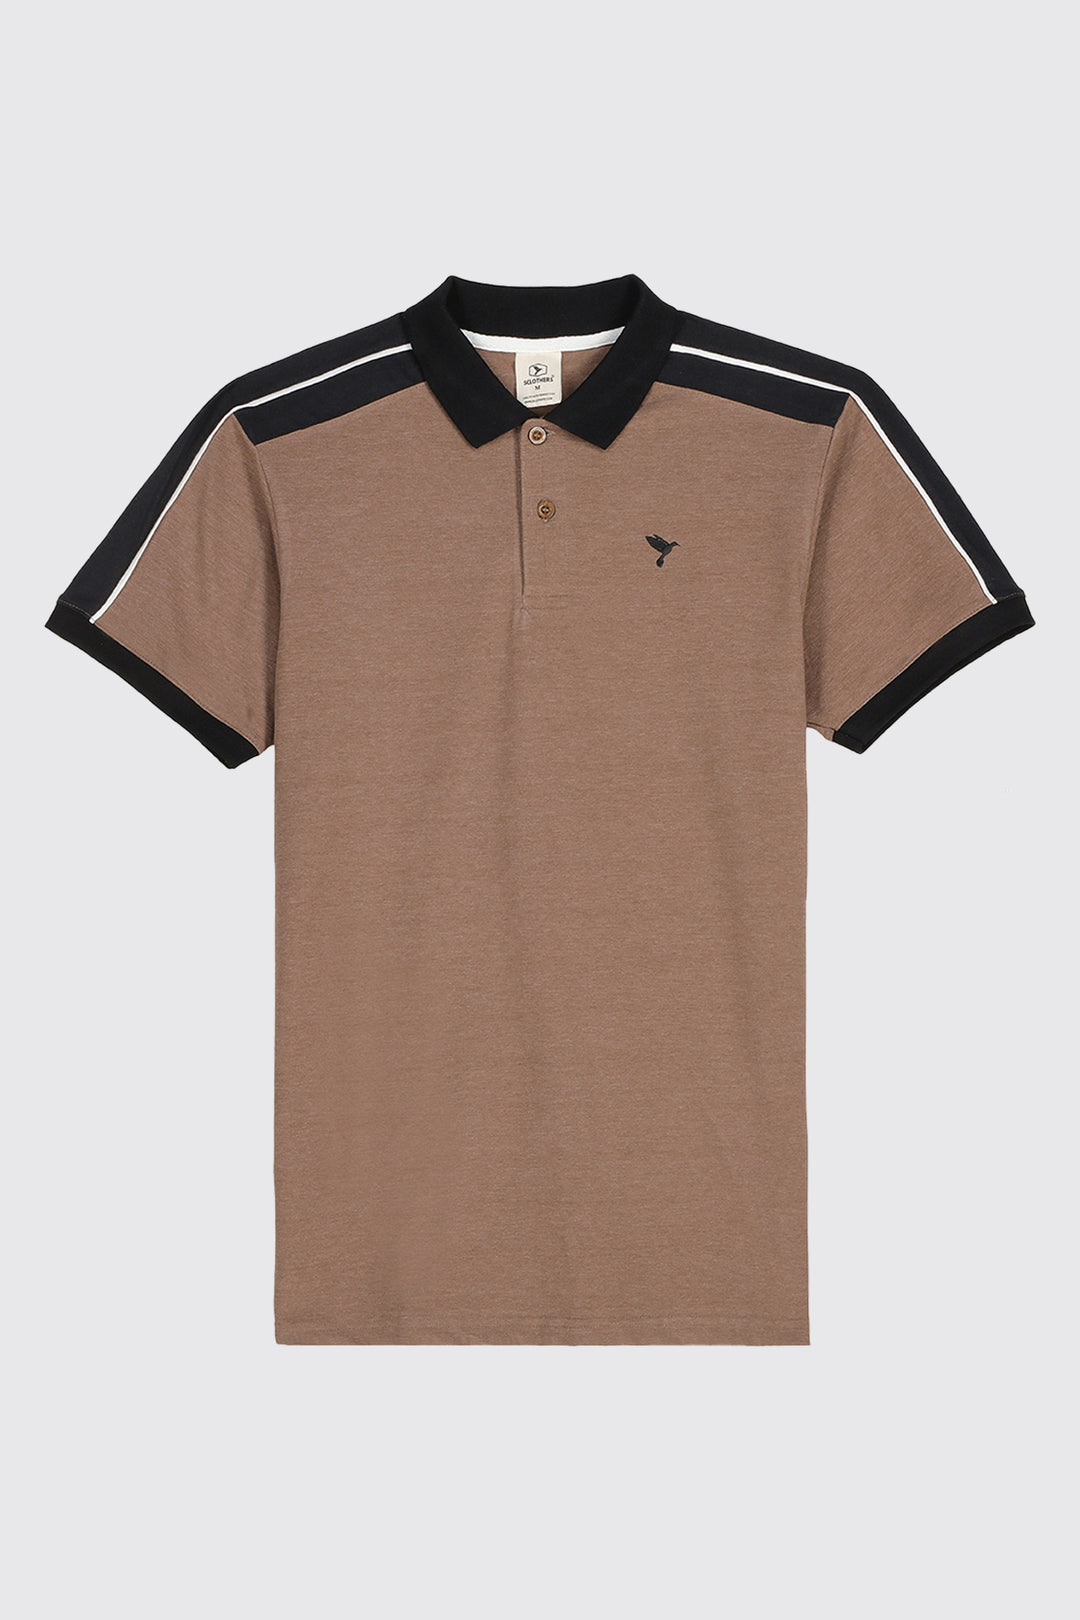 Brown Melange Embroidered Polo Shirt (Plus Size) - A23 - MP0179P